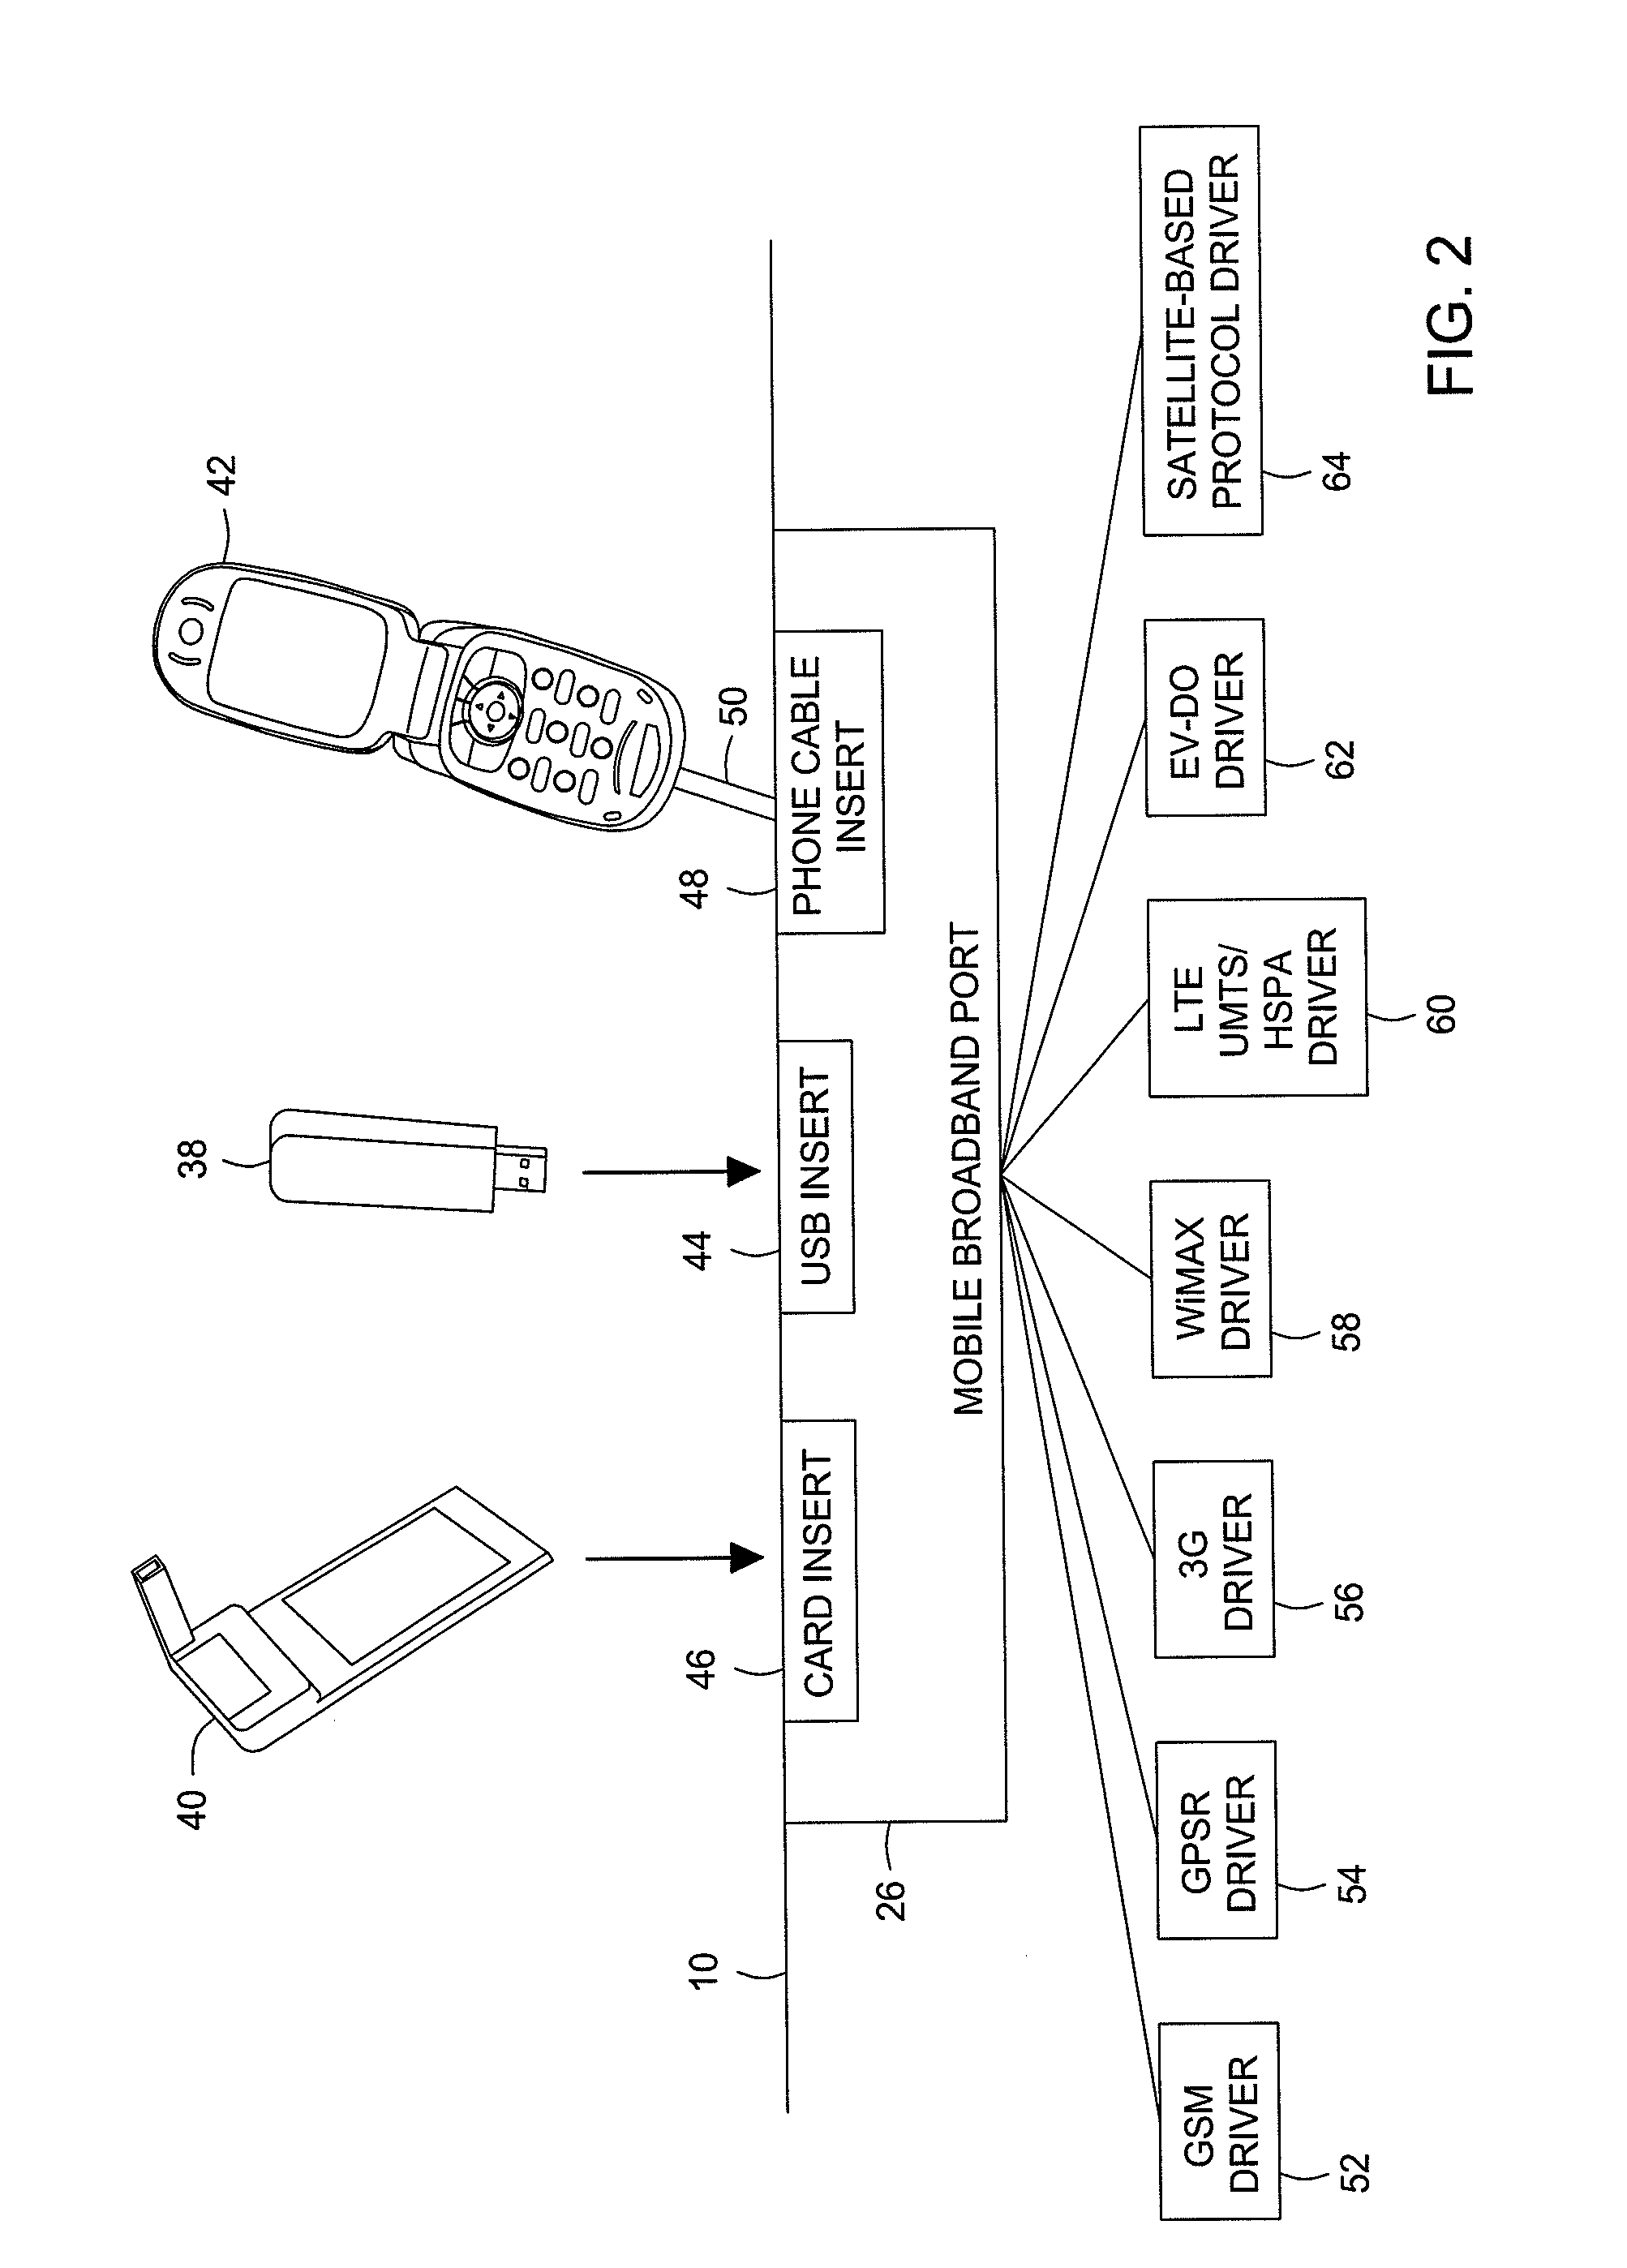 Scan Tool with Mobile Broadband Capability and Method of Operation Thereof